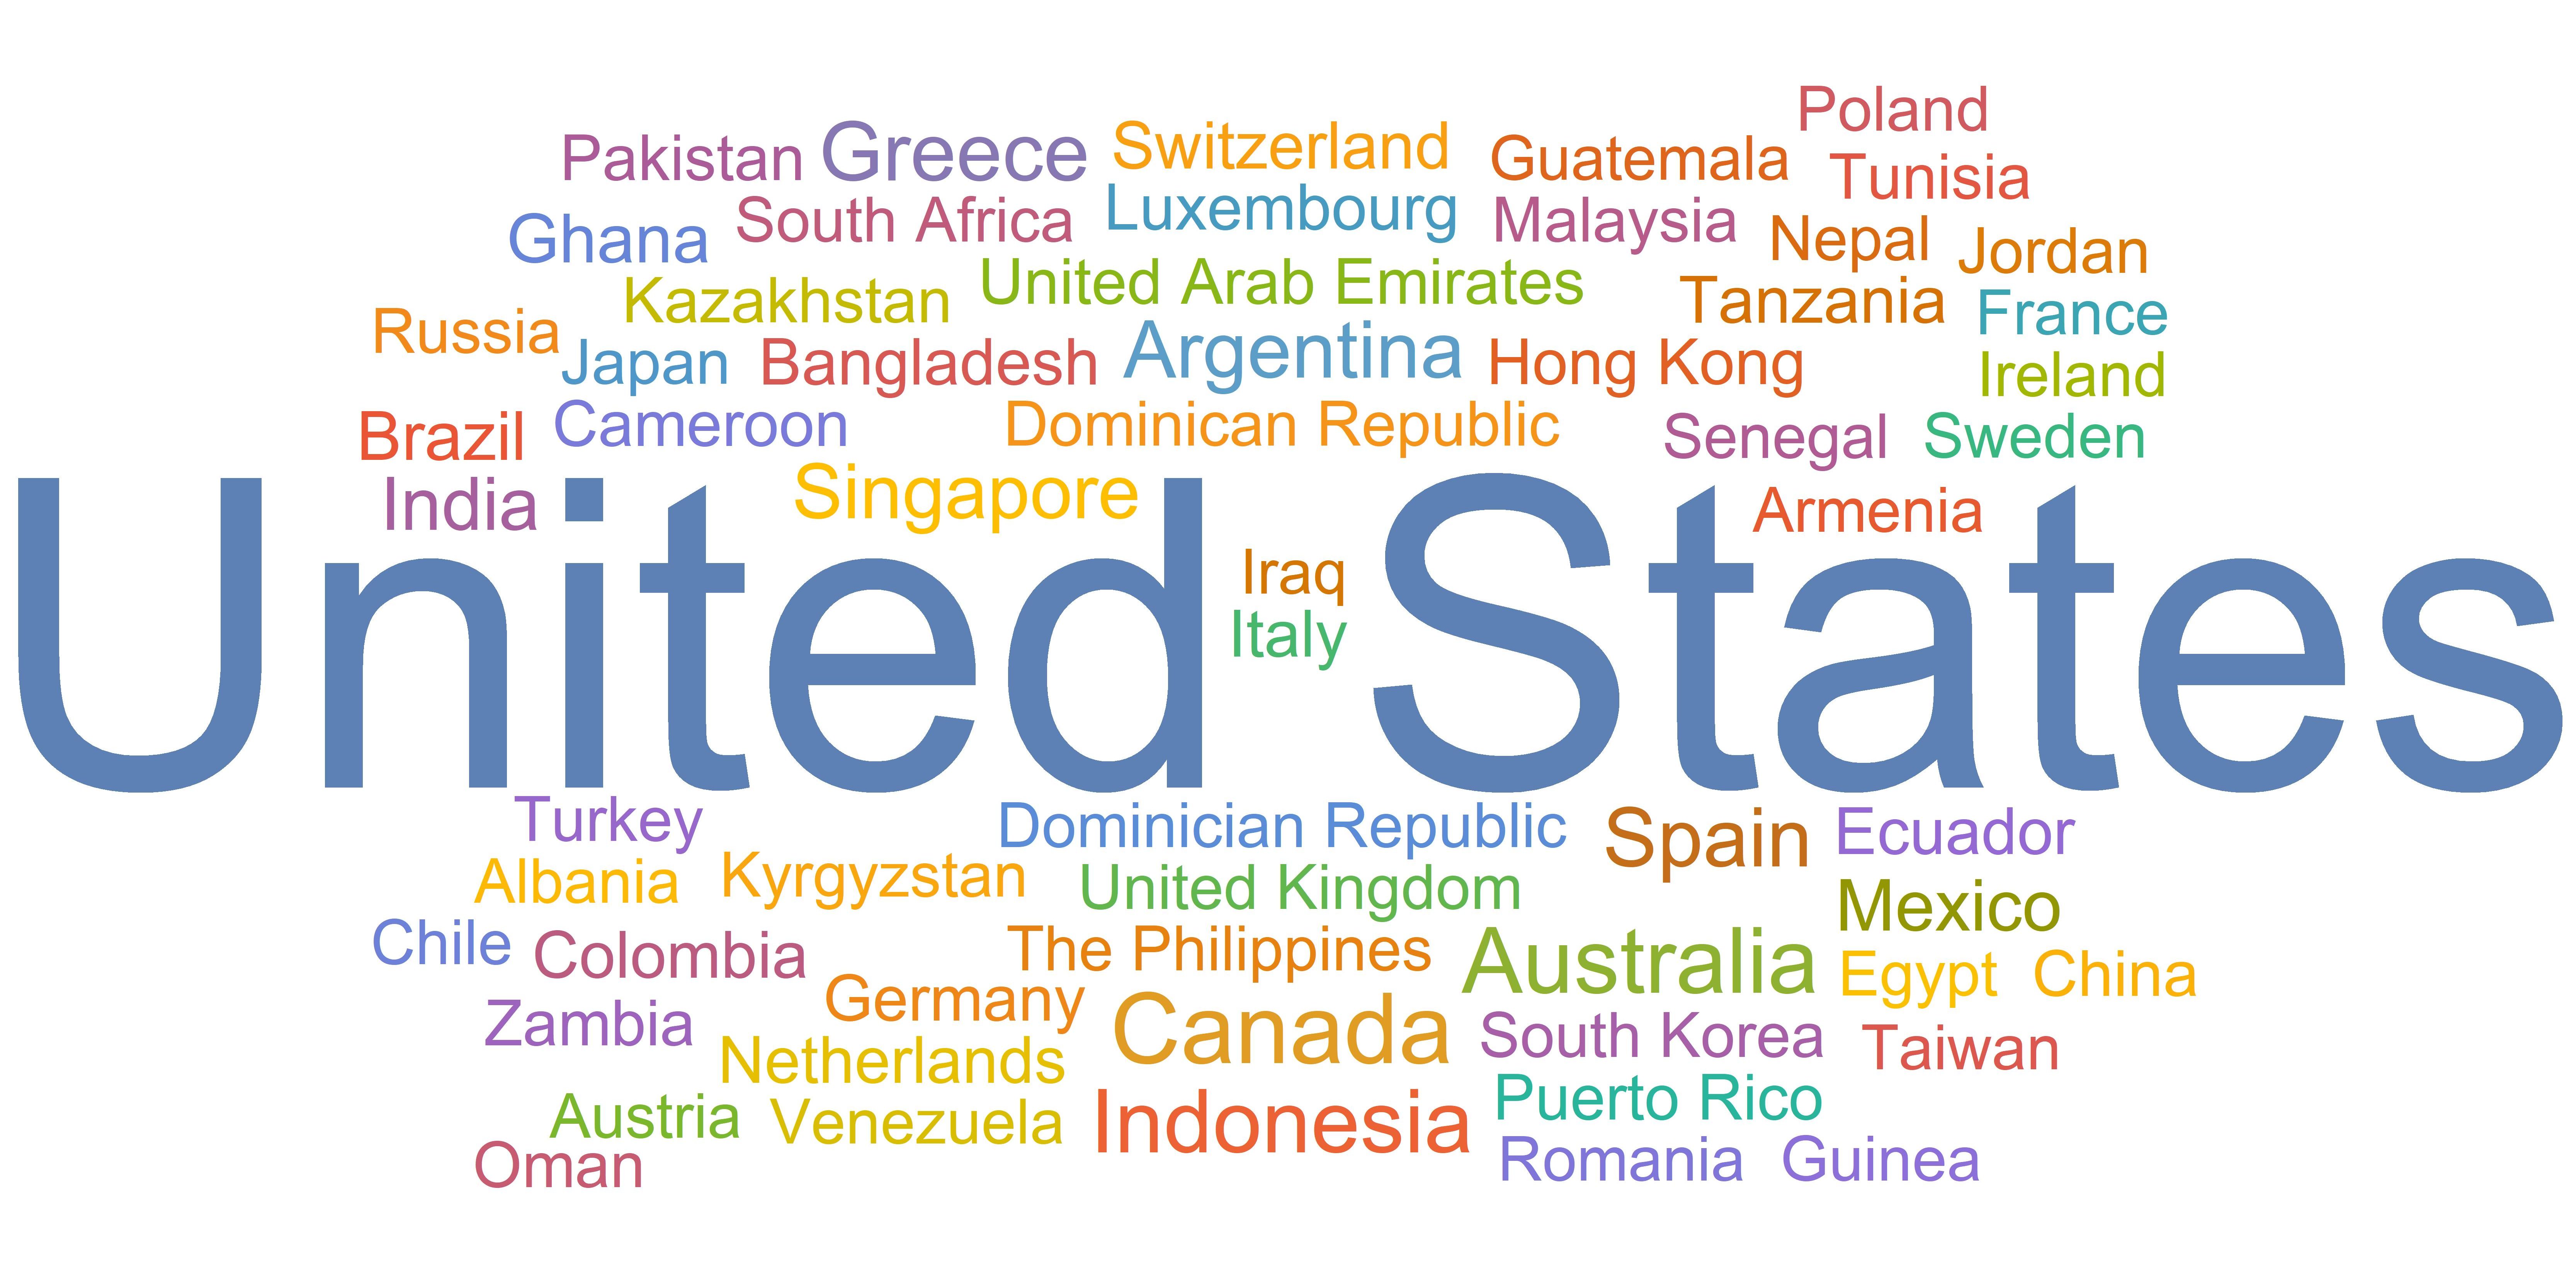 A word cloud of all the countries where students participate in Out of Eden Learn from. There are sixty countries total.